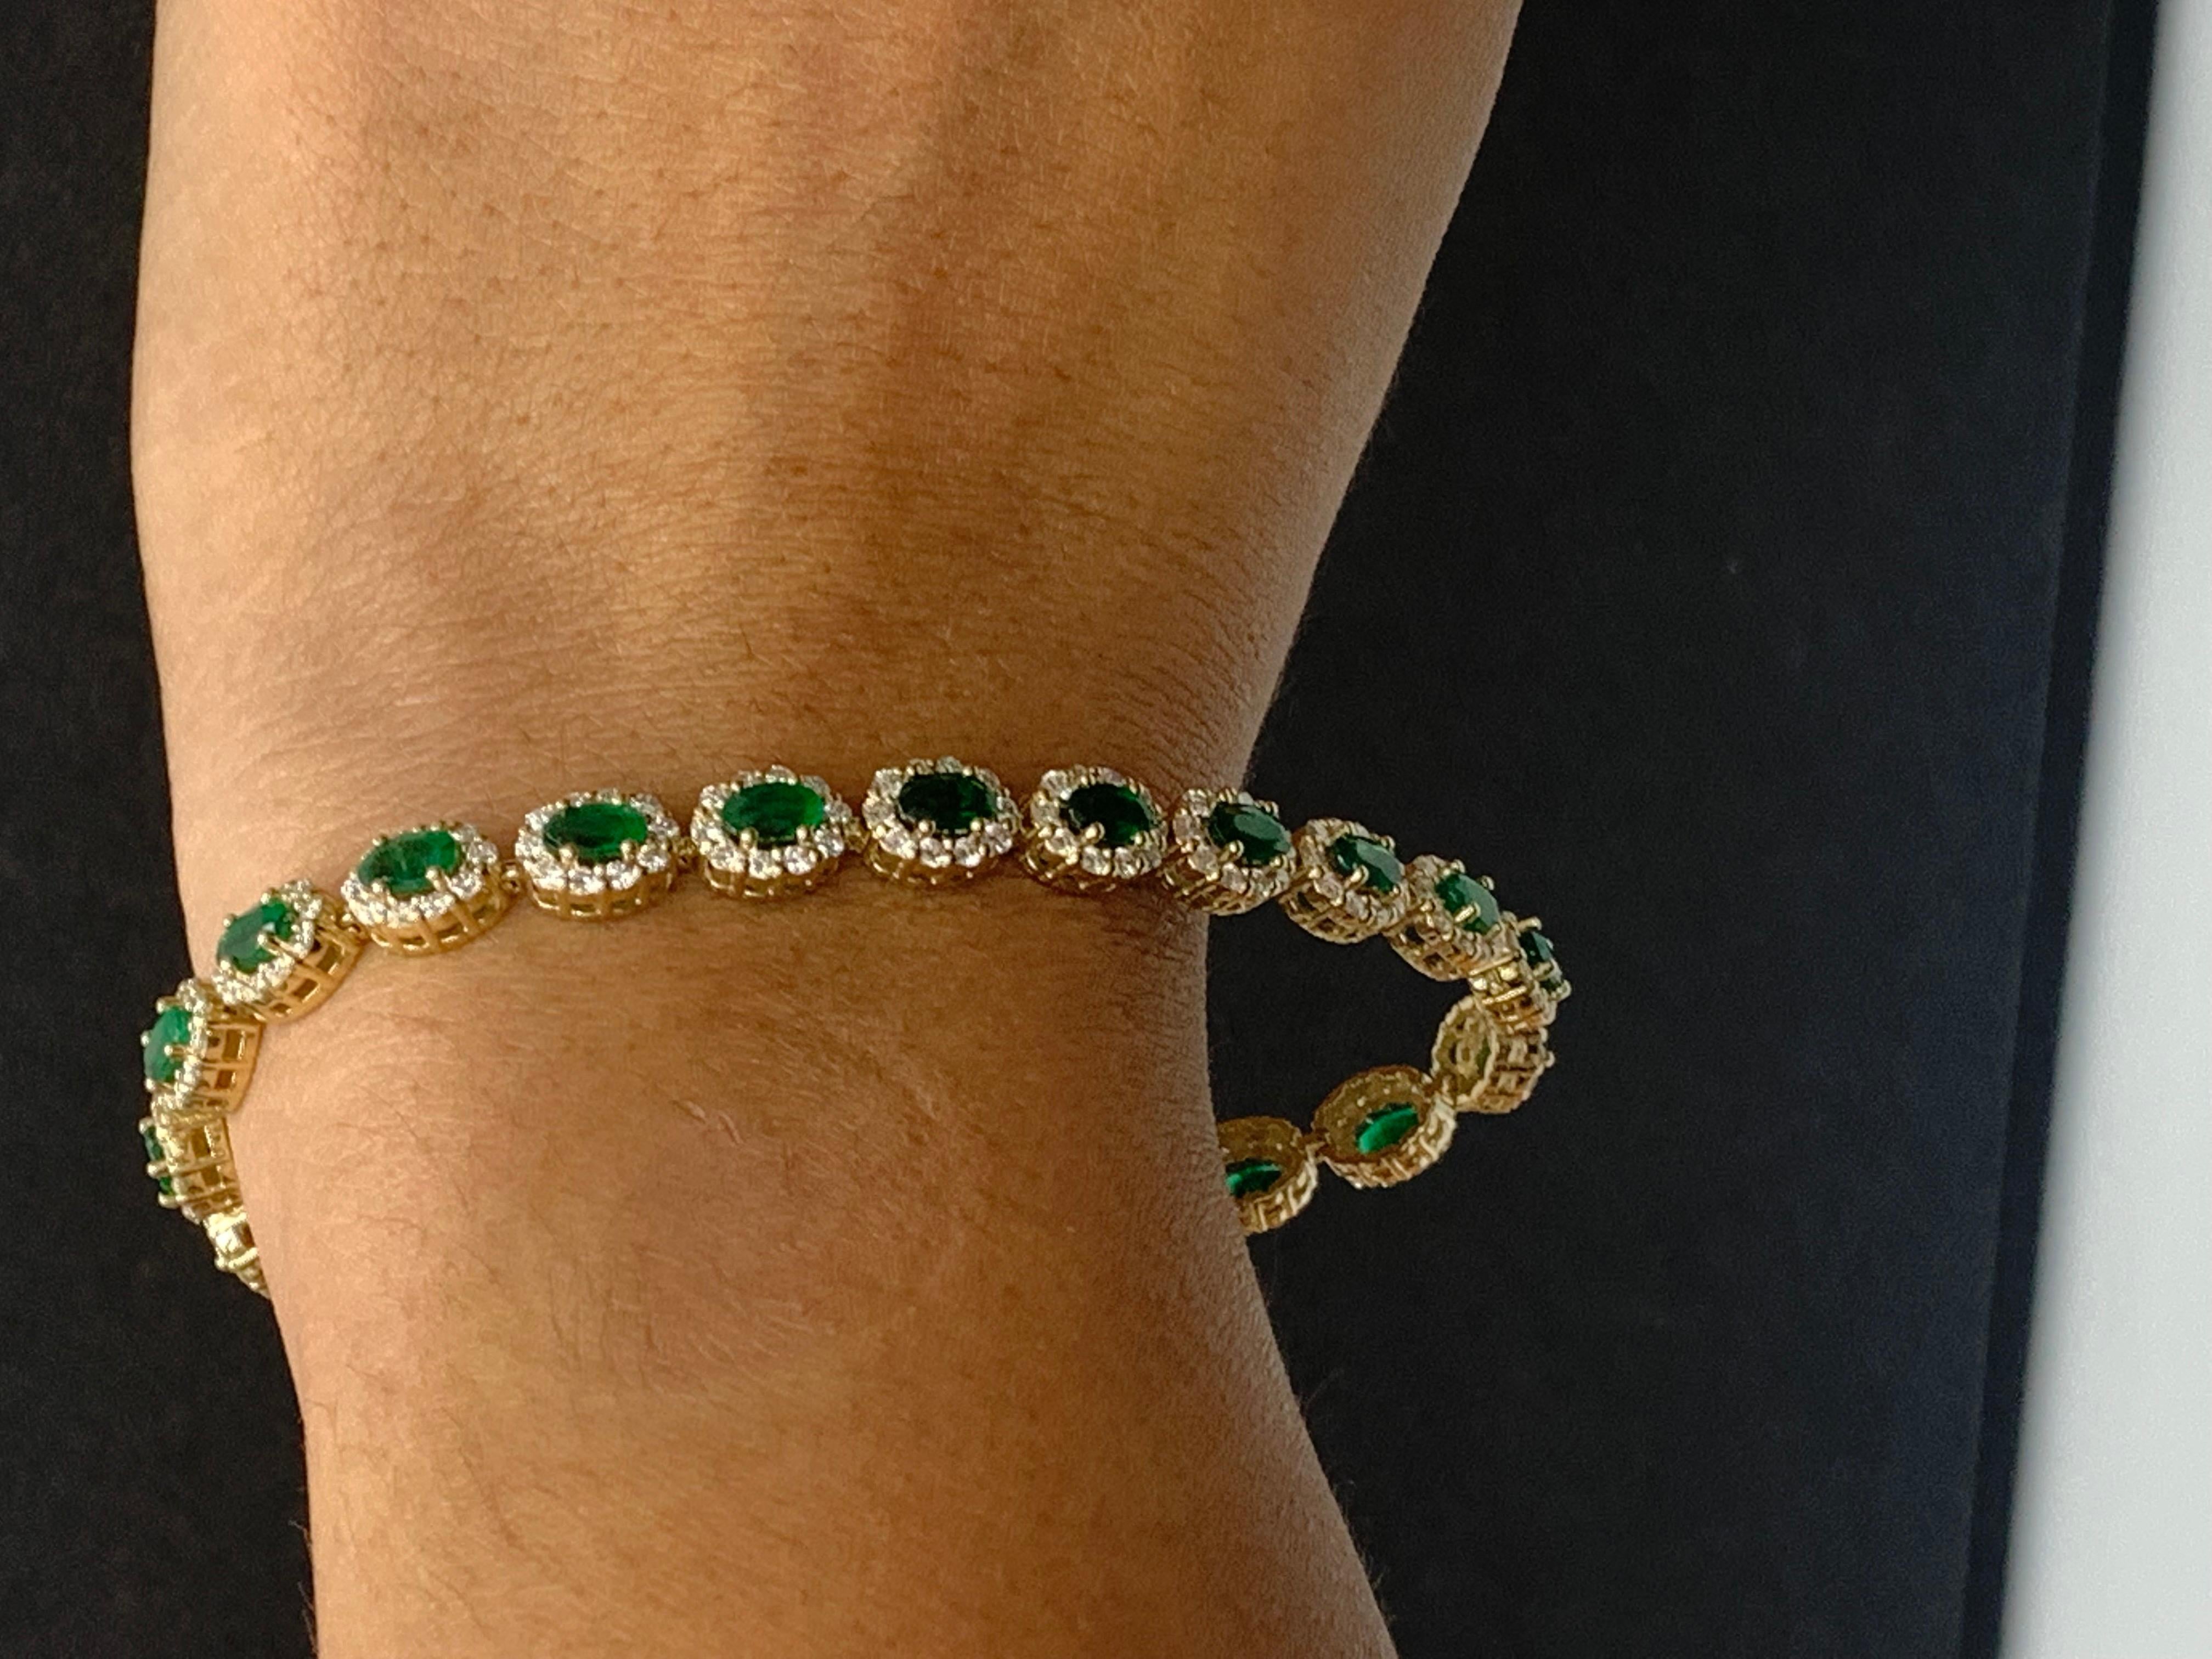 4.69 Carat Oval Cut Emerald and Diamond Halo Bracelet in 14K Yellow Gold For Sale 10